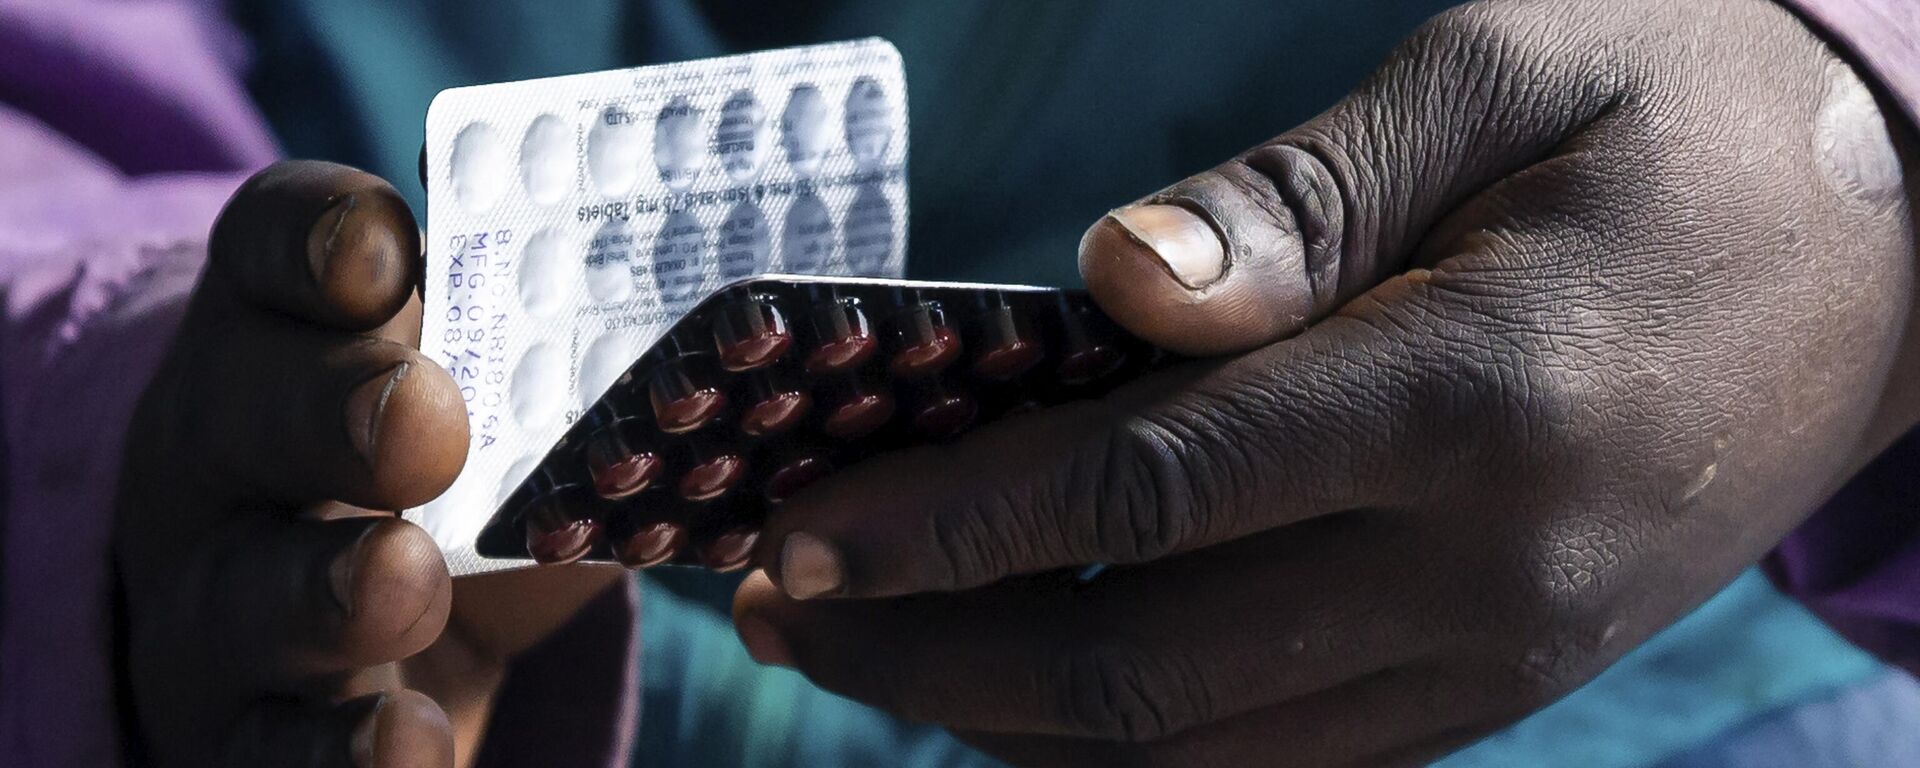 Blessing Chingwaru, 29, an HIV positive TB patient, holds a packet of tablets received as part of his treatment at Rutsanana Polyclinic in Glen Norah township, Harare June 24, 2019. - Sputnik Africa, 1920, 01.12.2023